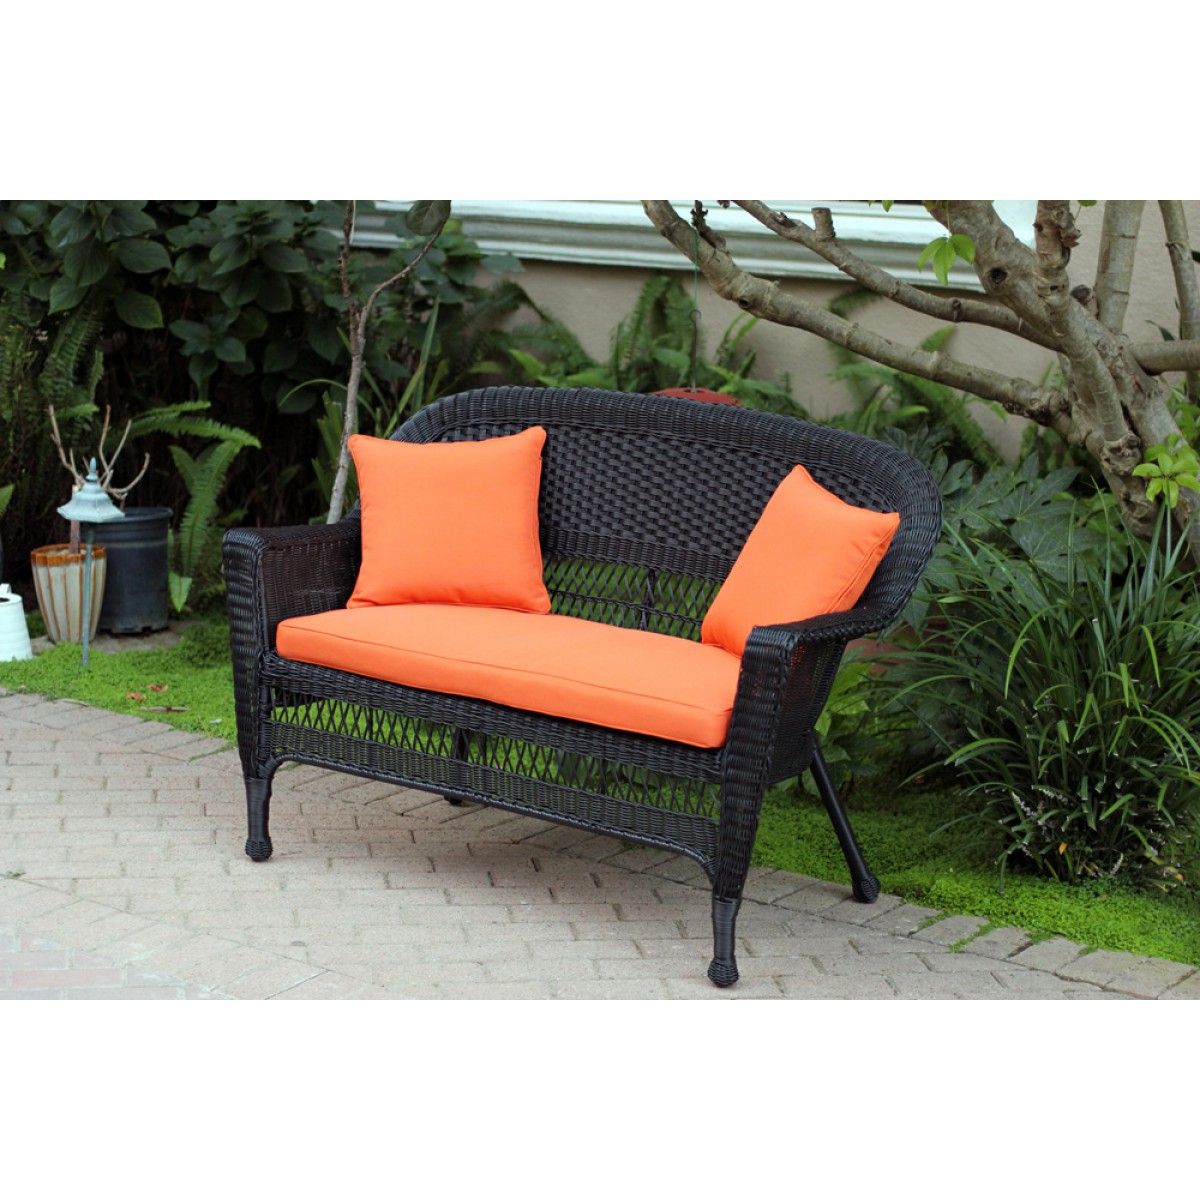 Favorite Outdoor Wicker Orange Cushion Patio Sets Regarding Black Wicker Patio Love Seat With Orange Cushion And Pillows (View 5 of 15)